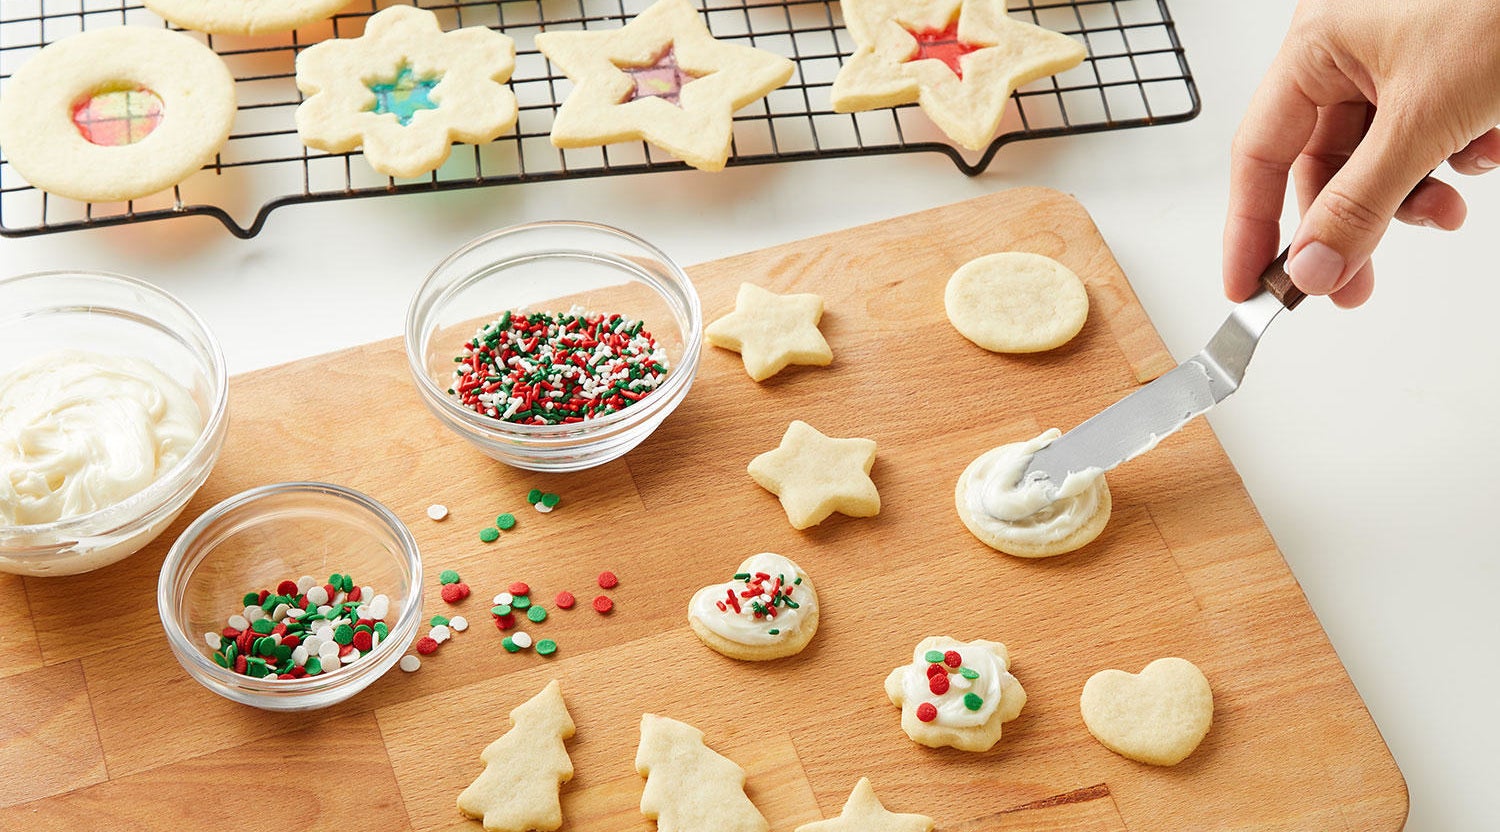 Sugar cookies in different holiday shapes with green and red sprinkles